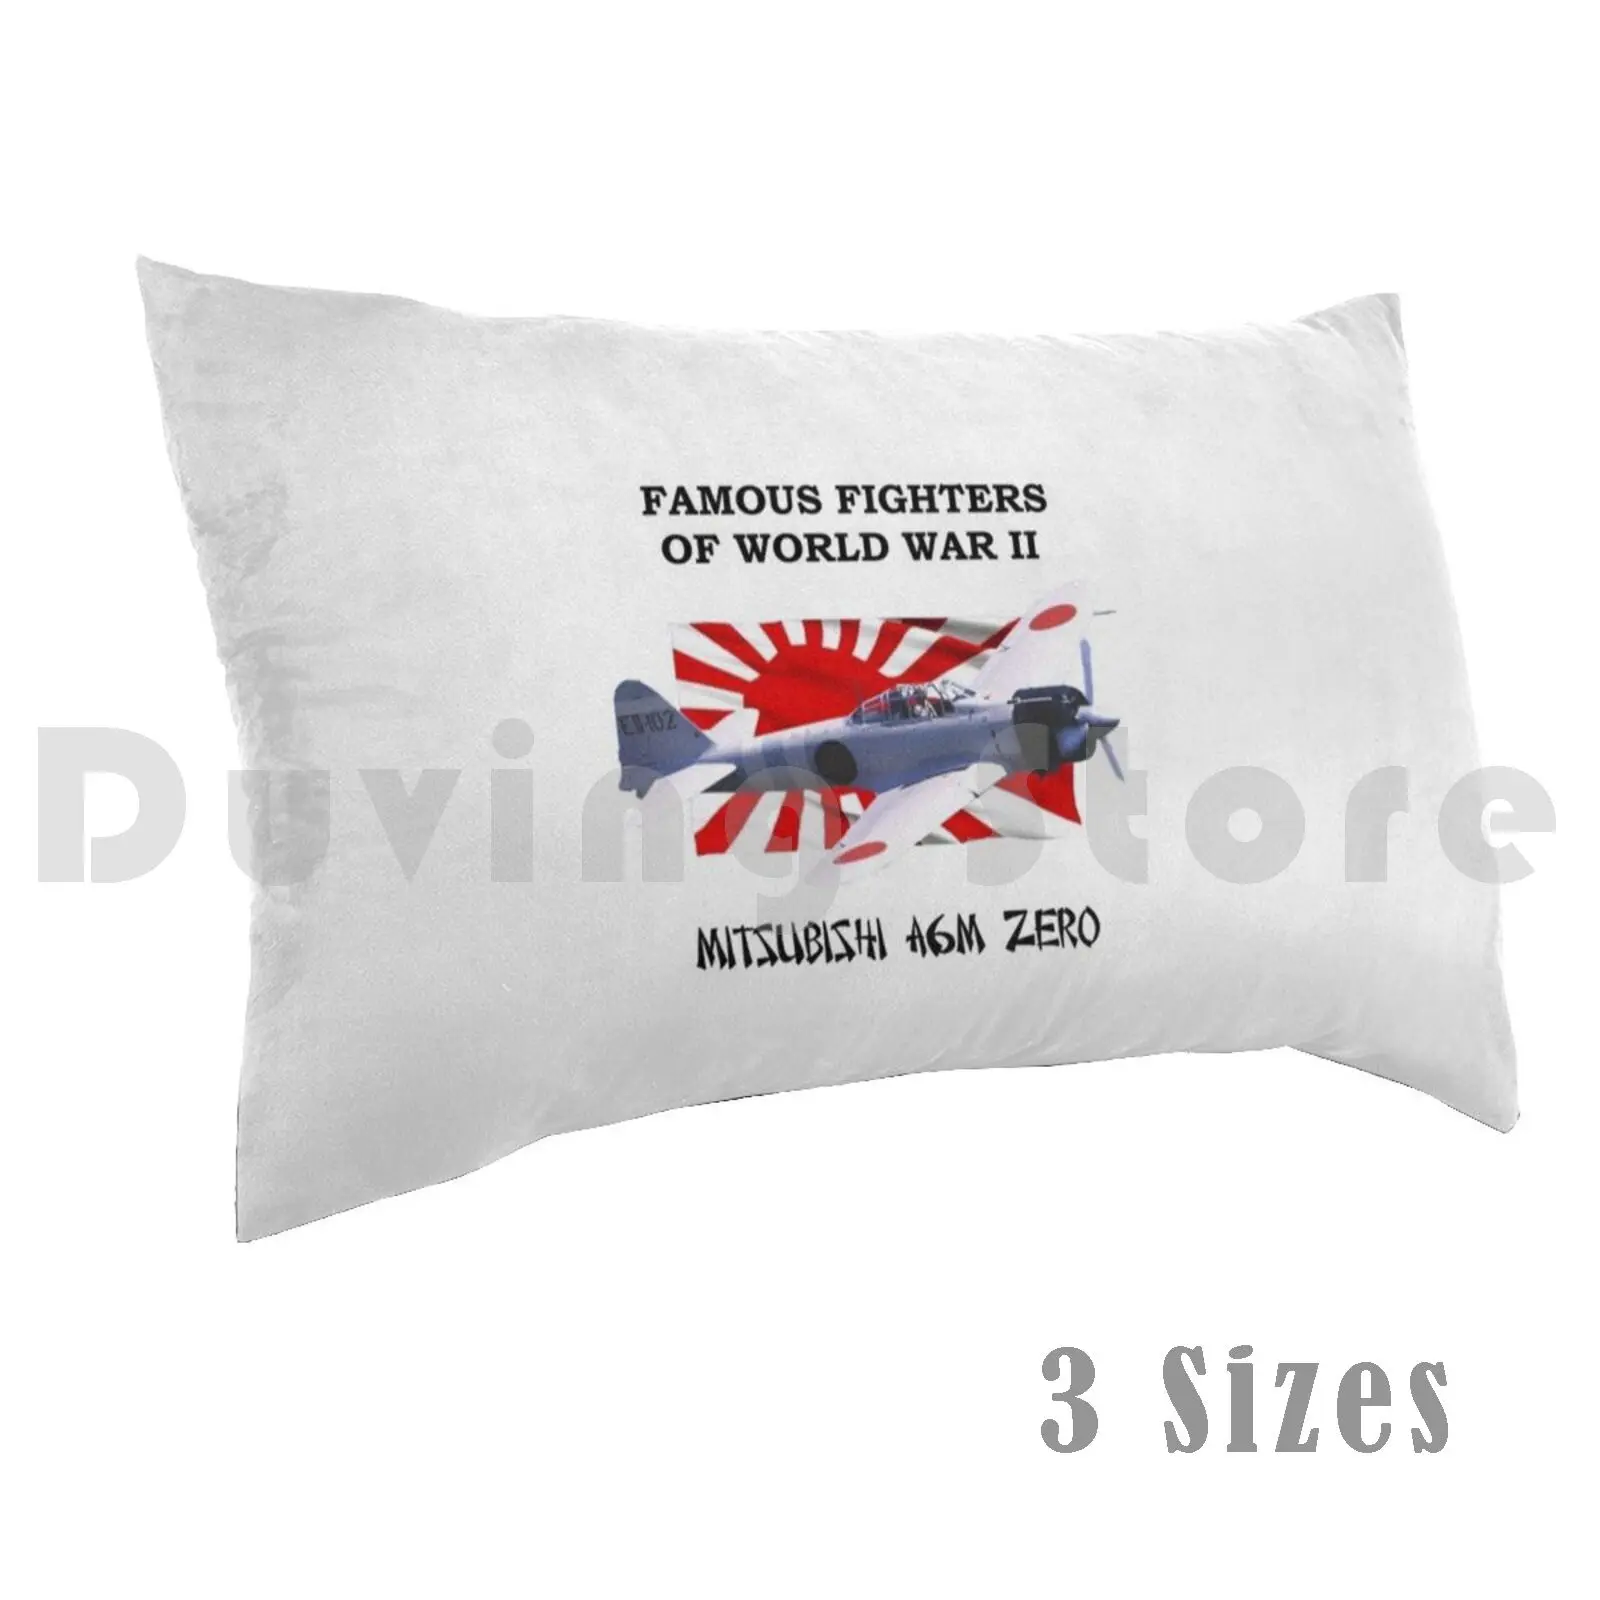 

Famous Fighters-A6m Zero Pillow Case DIY 50x75 A6m Zero Ijn Japan Ww2 Wwii Fighter Carrier Fighter